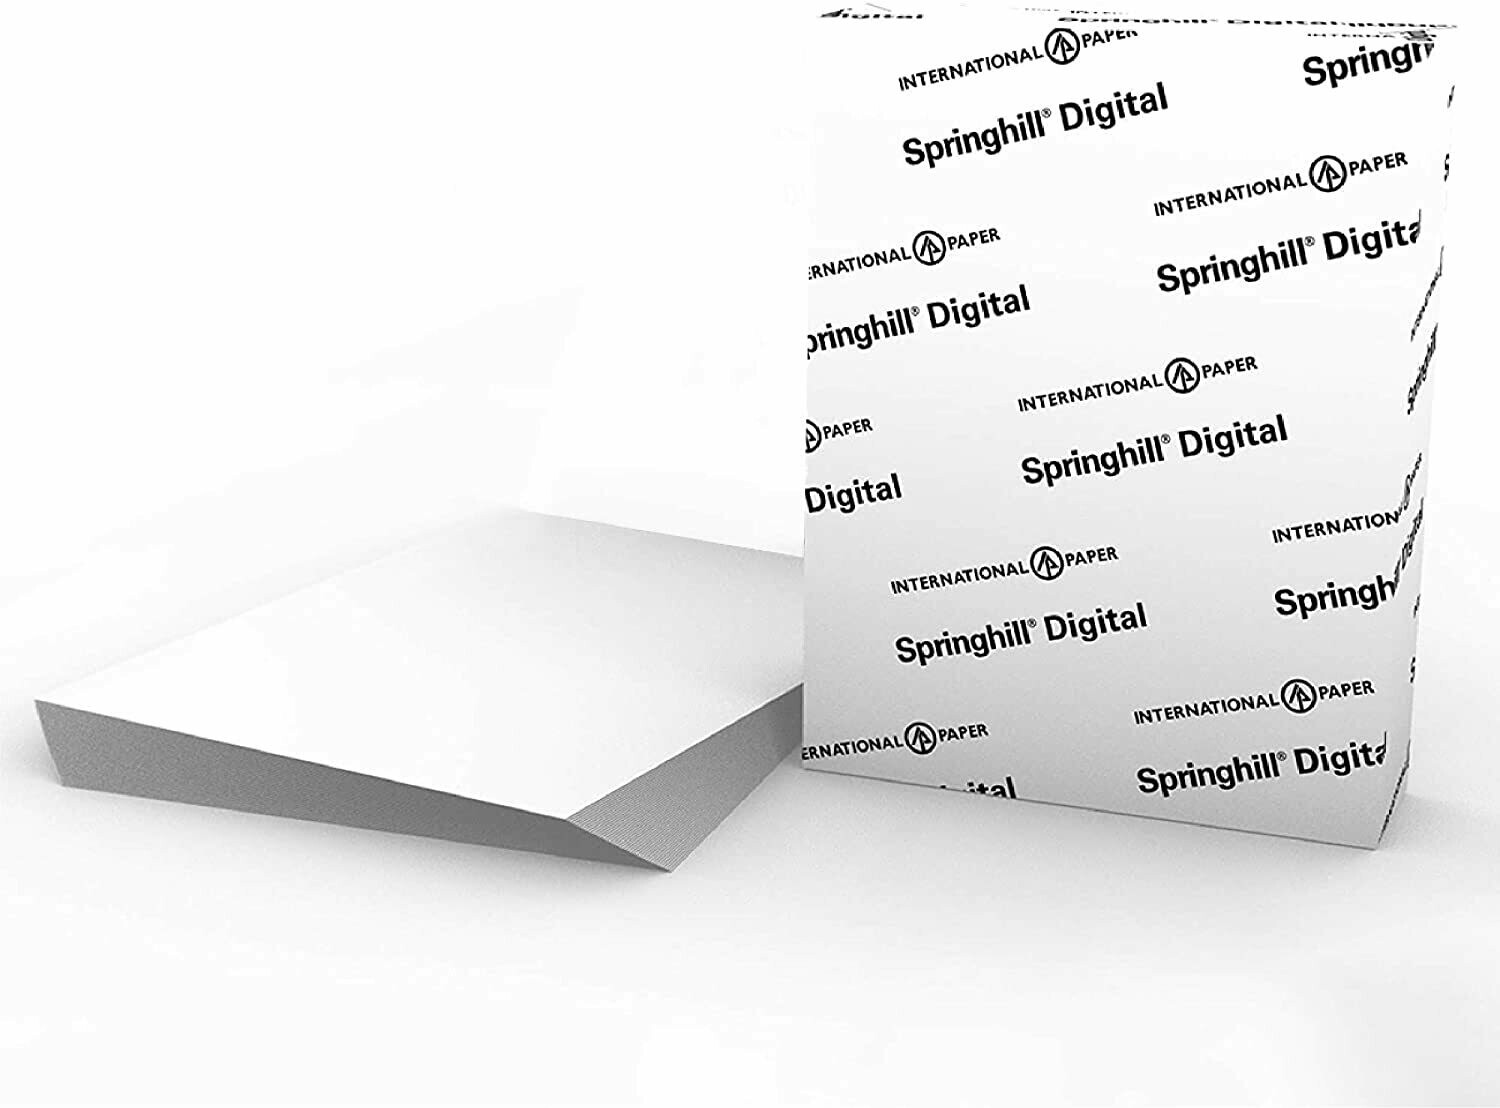 Springhill White Card Stock, 8.5x11 - 110lb. index